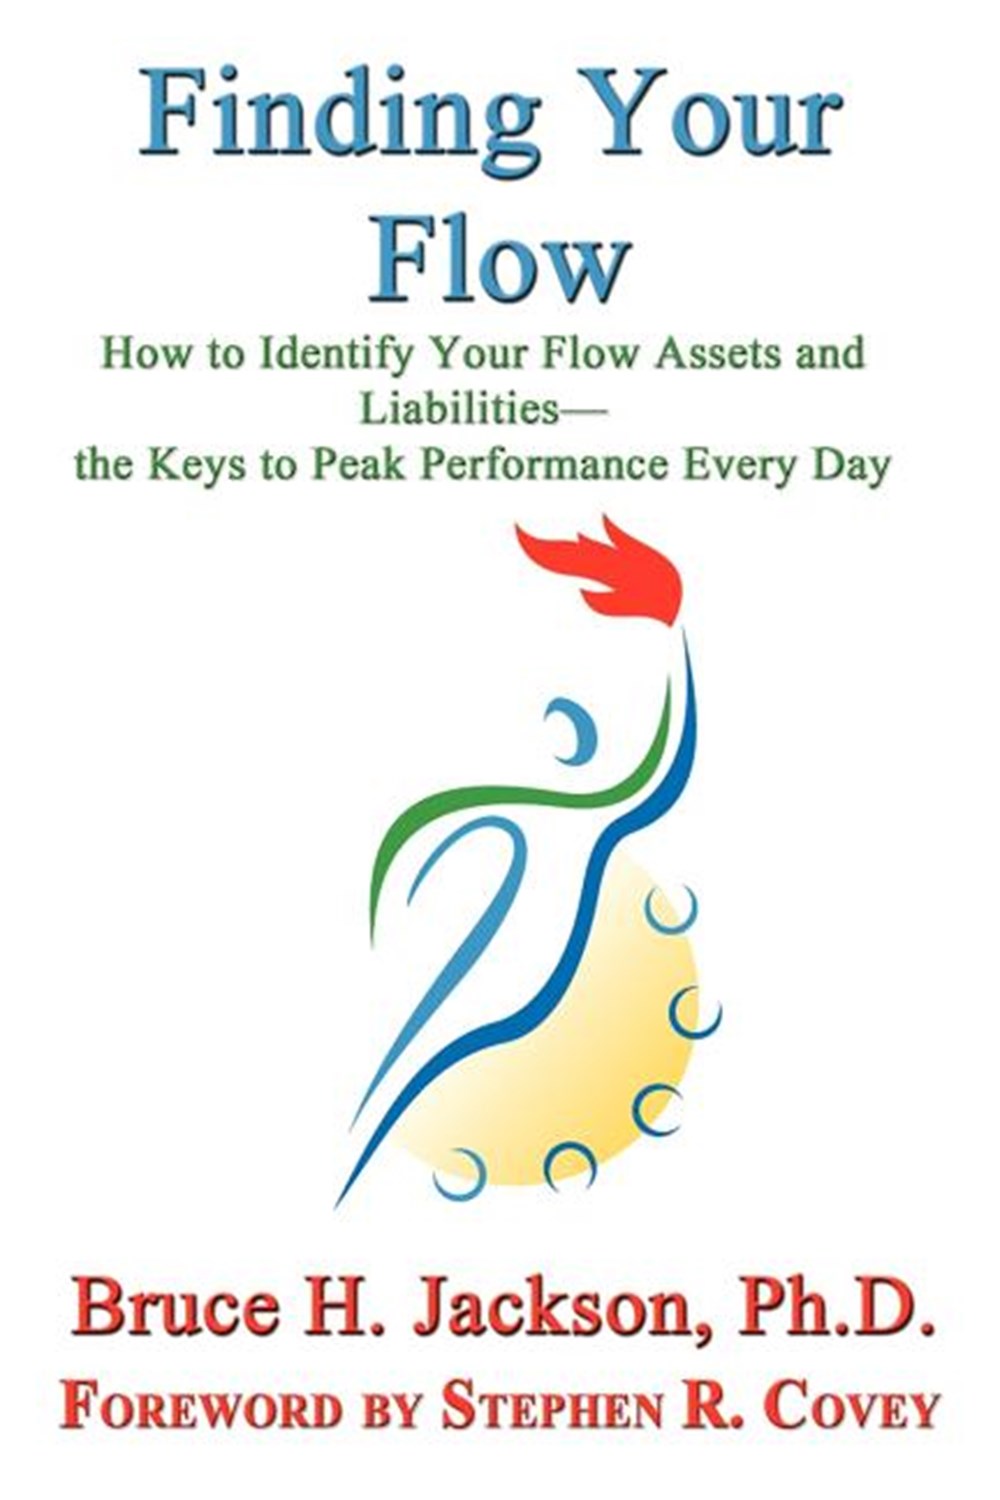 Finding Your Flow - How to Identify Your Flow Assets and Liabilities - The Keys to Peak Performance 